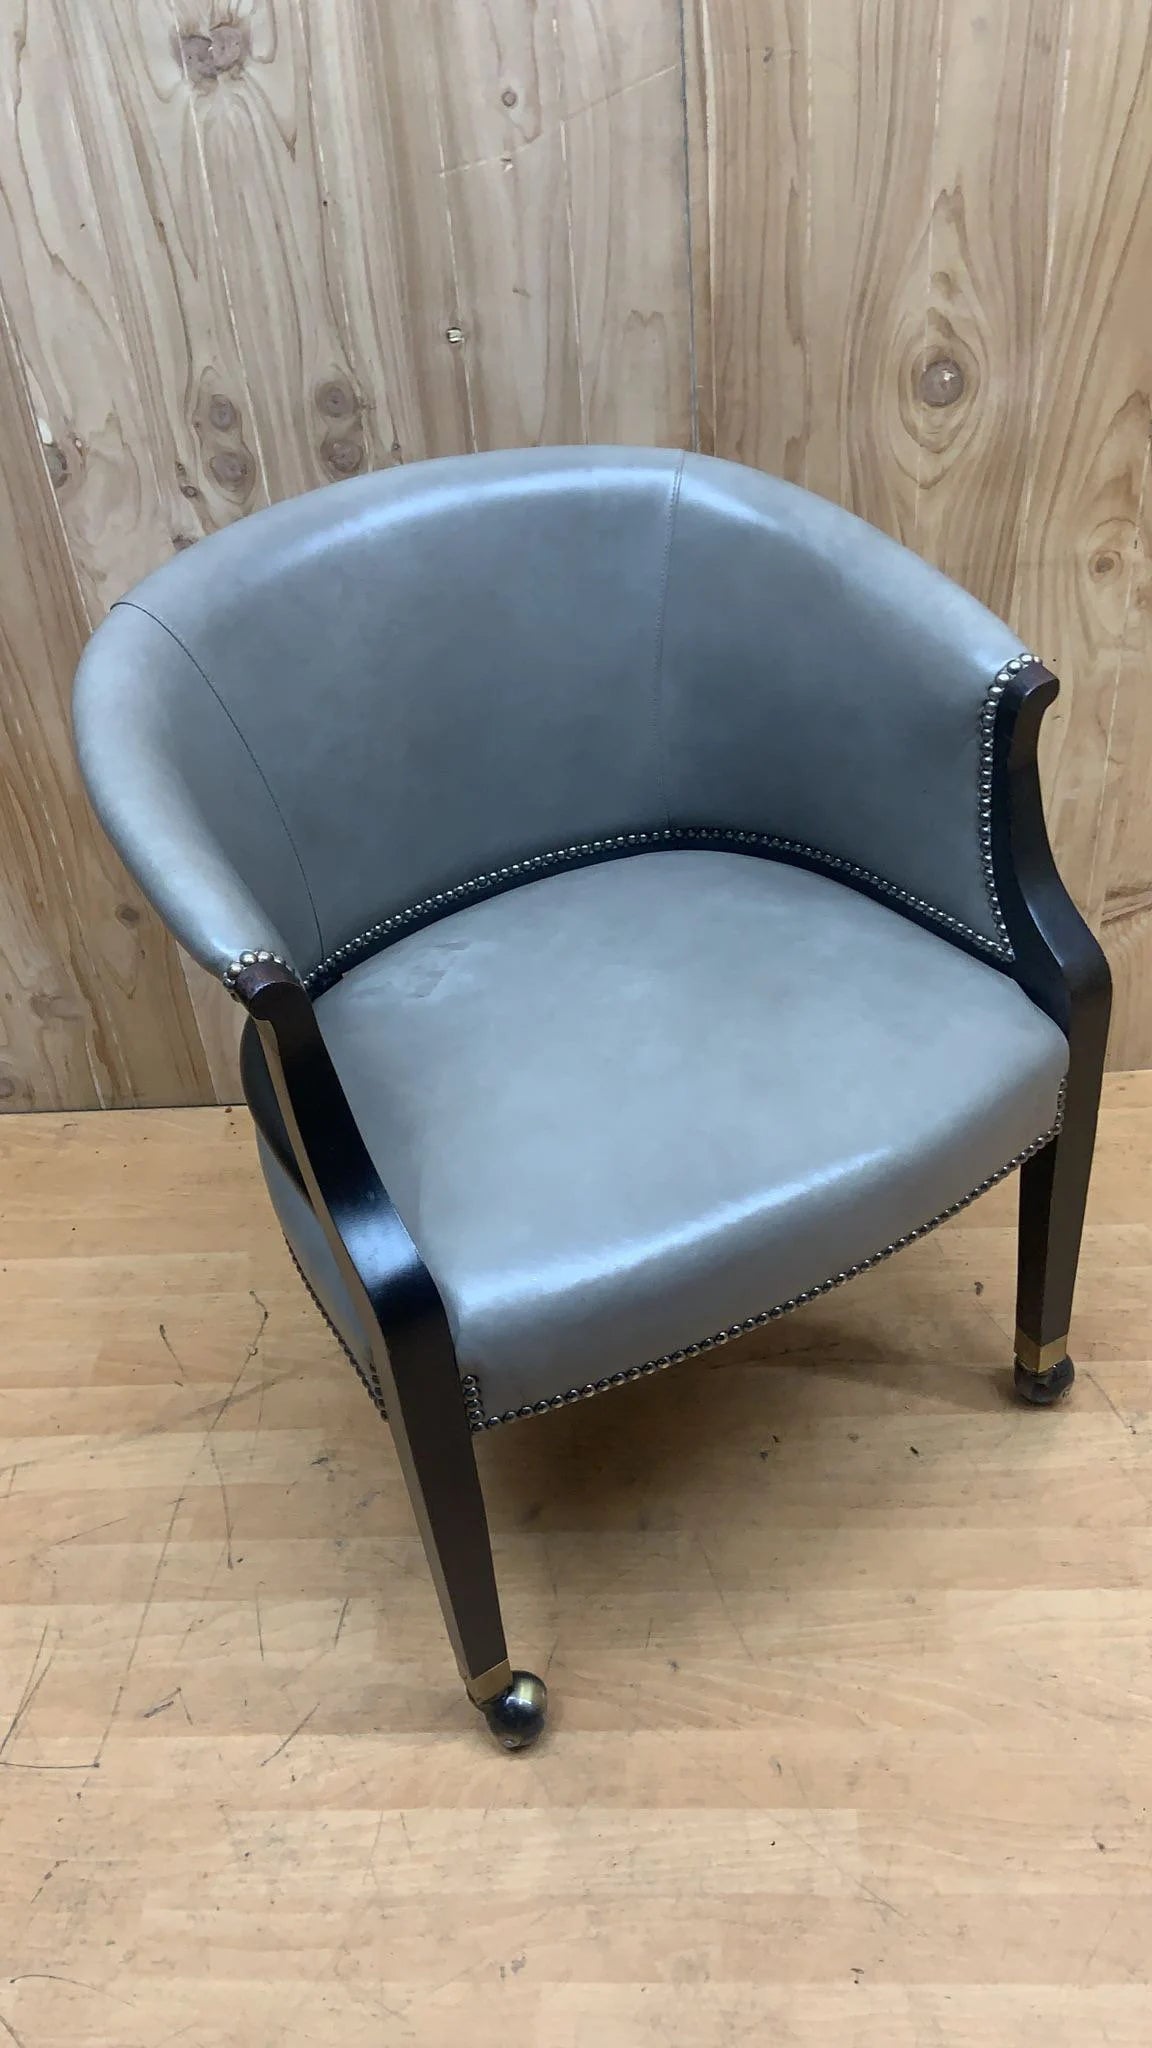 Classic Vintage Castered Barrel Back Side-Chair  w/ Grey Ebonized Frame Upholstered in Original Full Grain Grey Leather by Hickory Chair